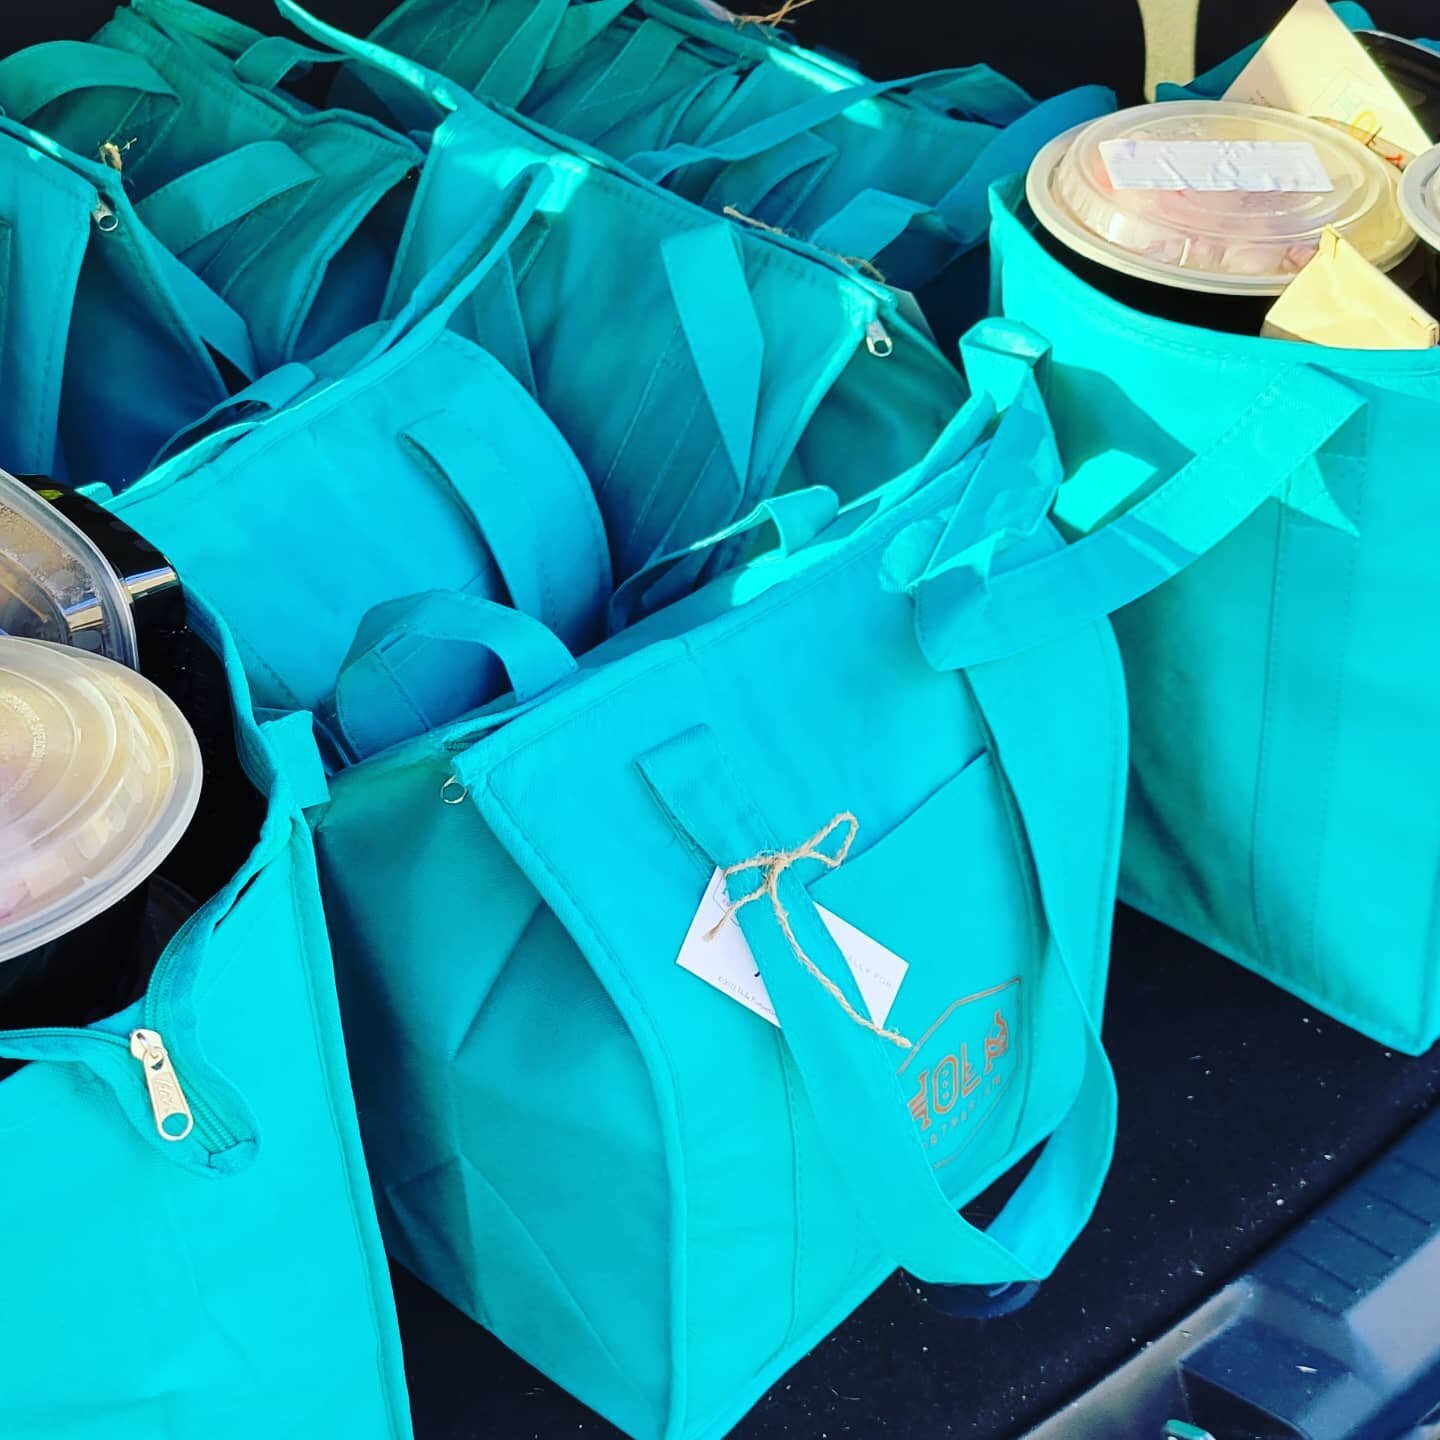 Did you know we do a recycle program with our insulated bags?
.
If you have one of our teal Hola Postpartum insulated bags, we ask that you leave it on your doorstep during delivery of your next order, or bring it in while picking up your next order,